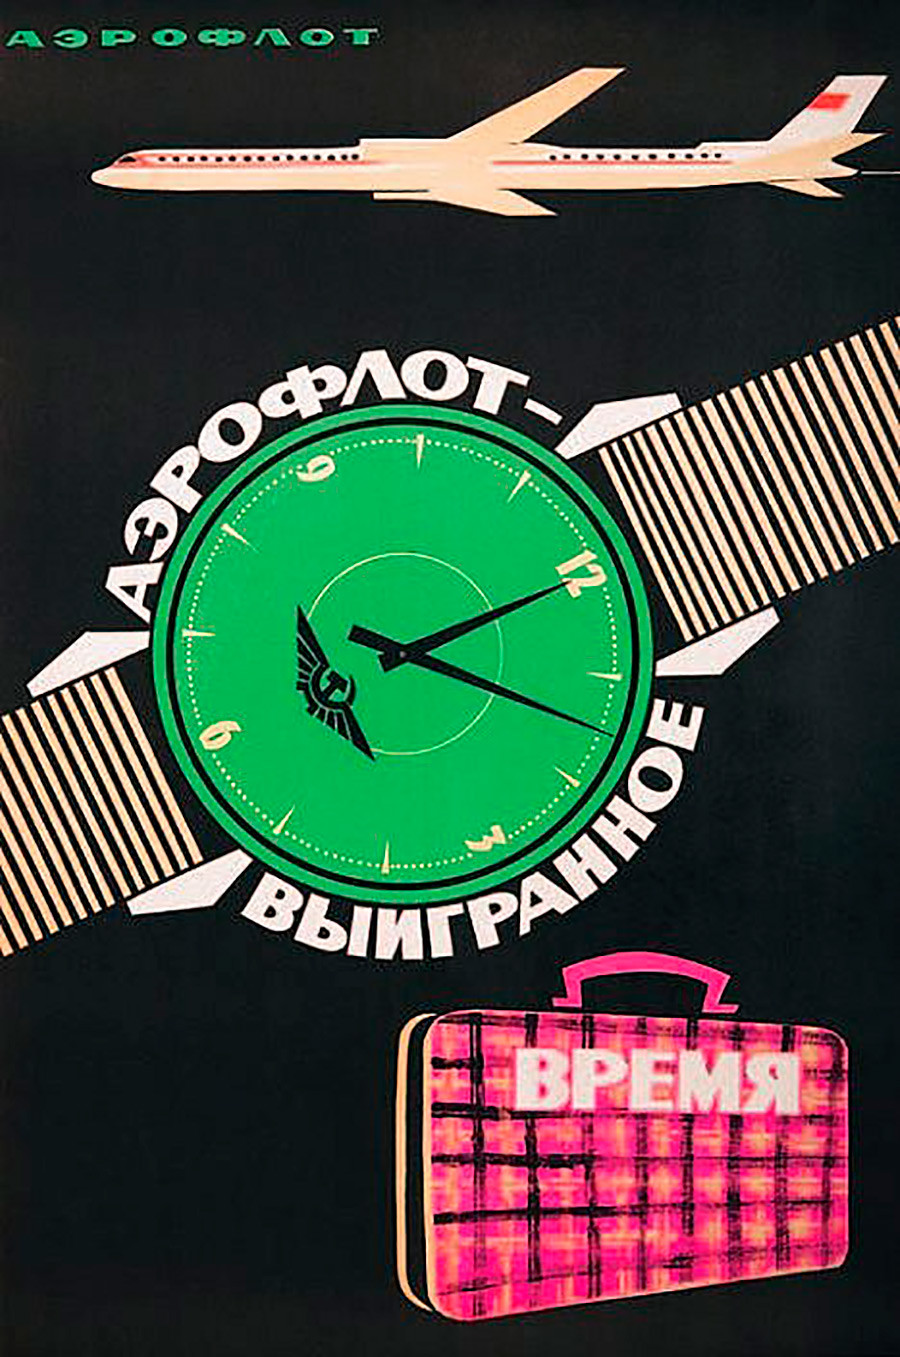 'Aeroflot - the gift of time'